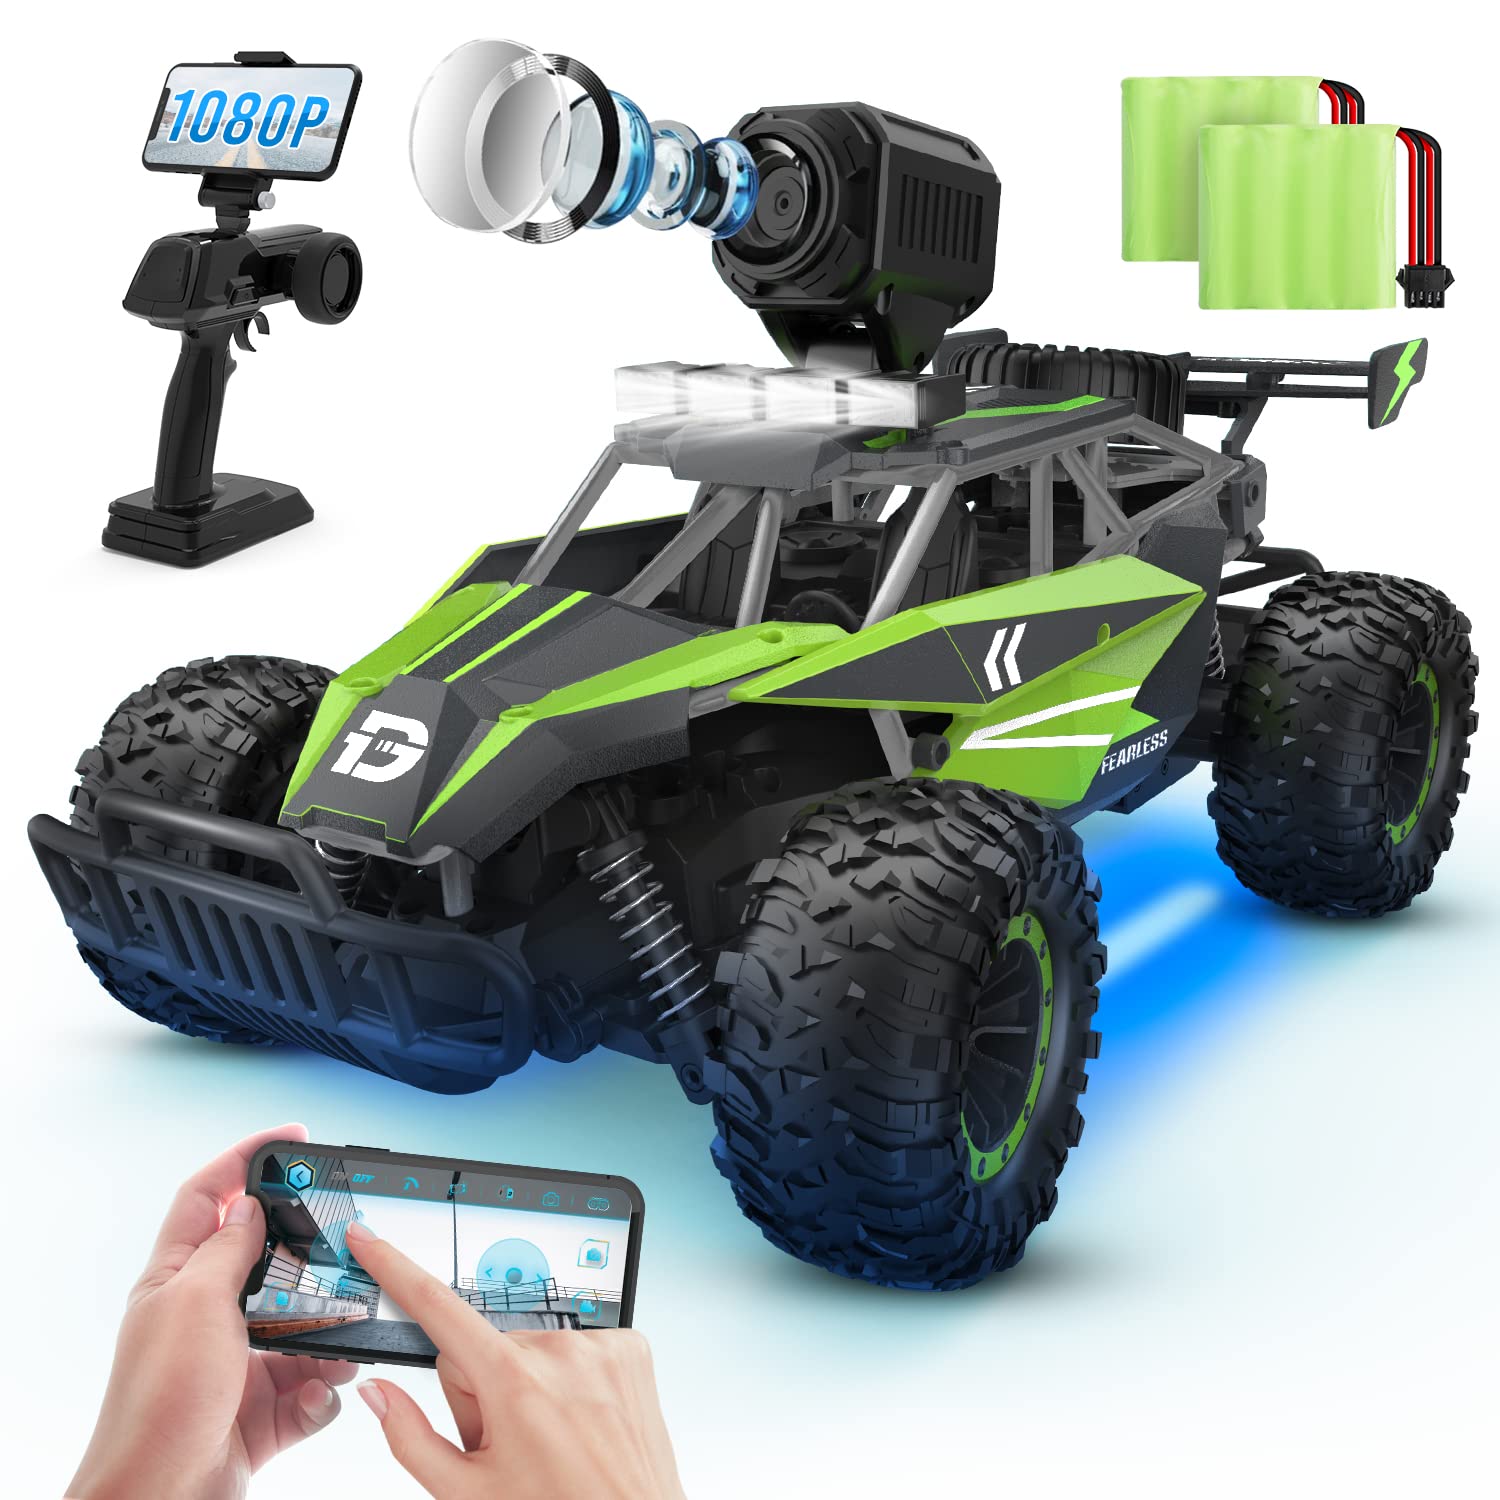 DEERC DE65 Remote Control Car with 1080P HD Camera,1:16 Scale RC Cars with LED Chassis Light&Headlights, 2.4Ghz High Speed Monster Truck Toy Vehicle, 2 Batteries for 60 Mins Play, Gift for Kids Boys